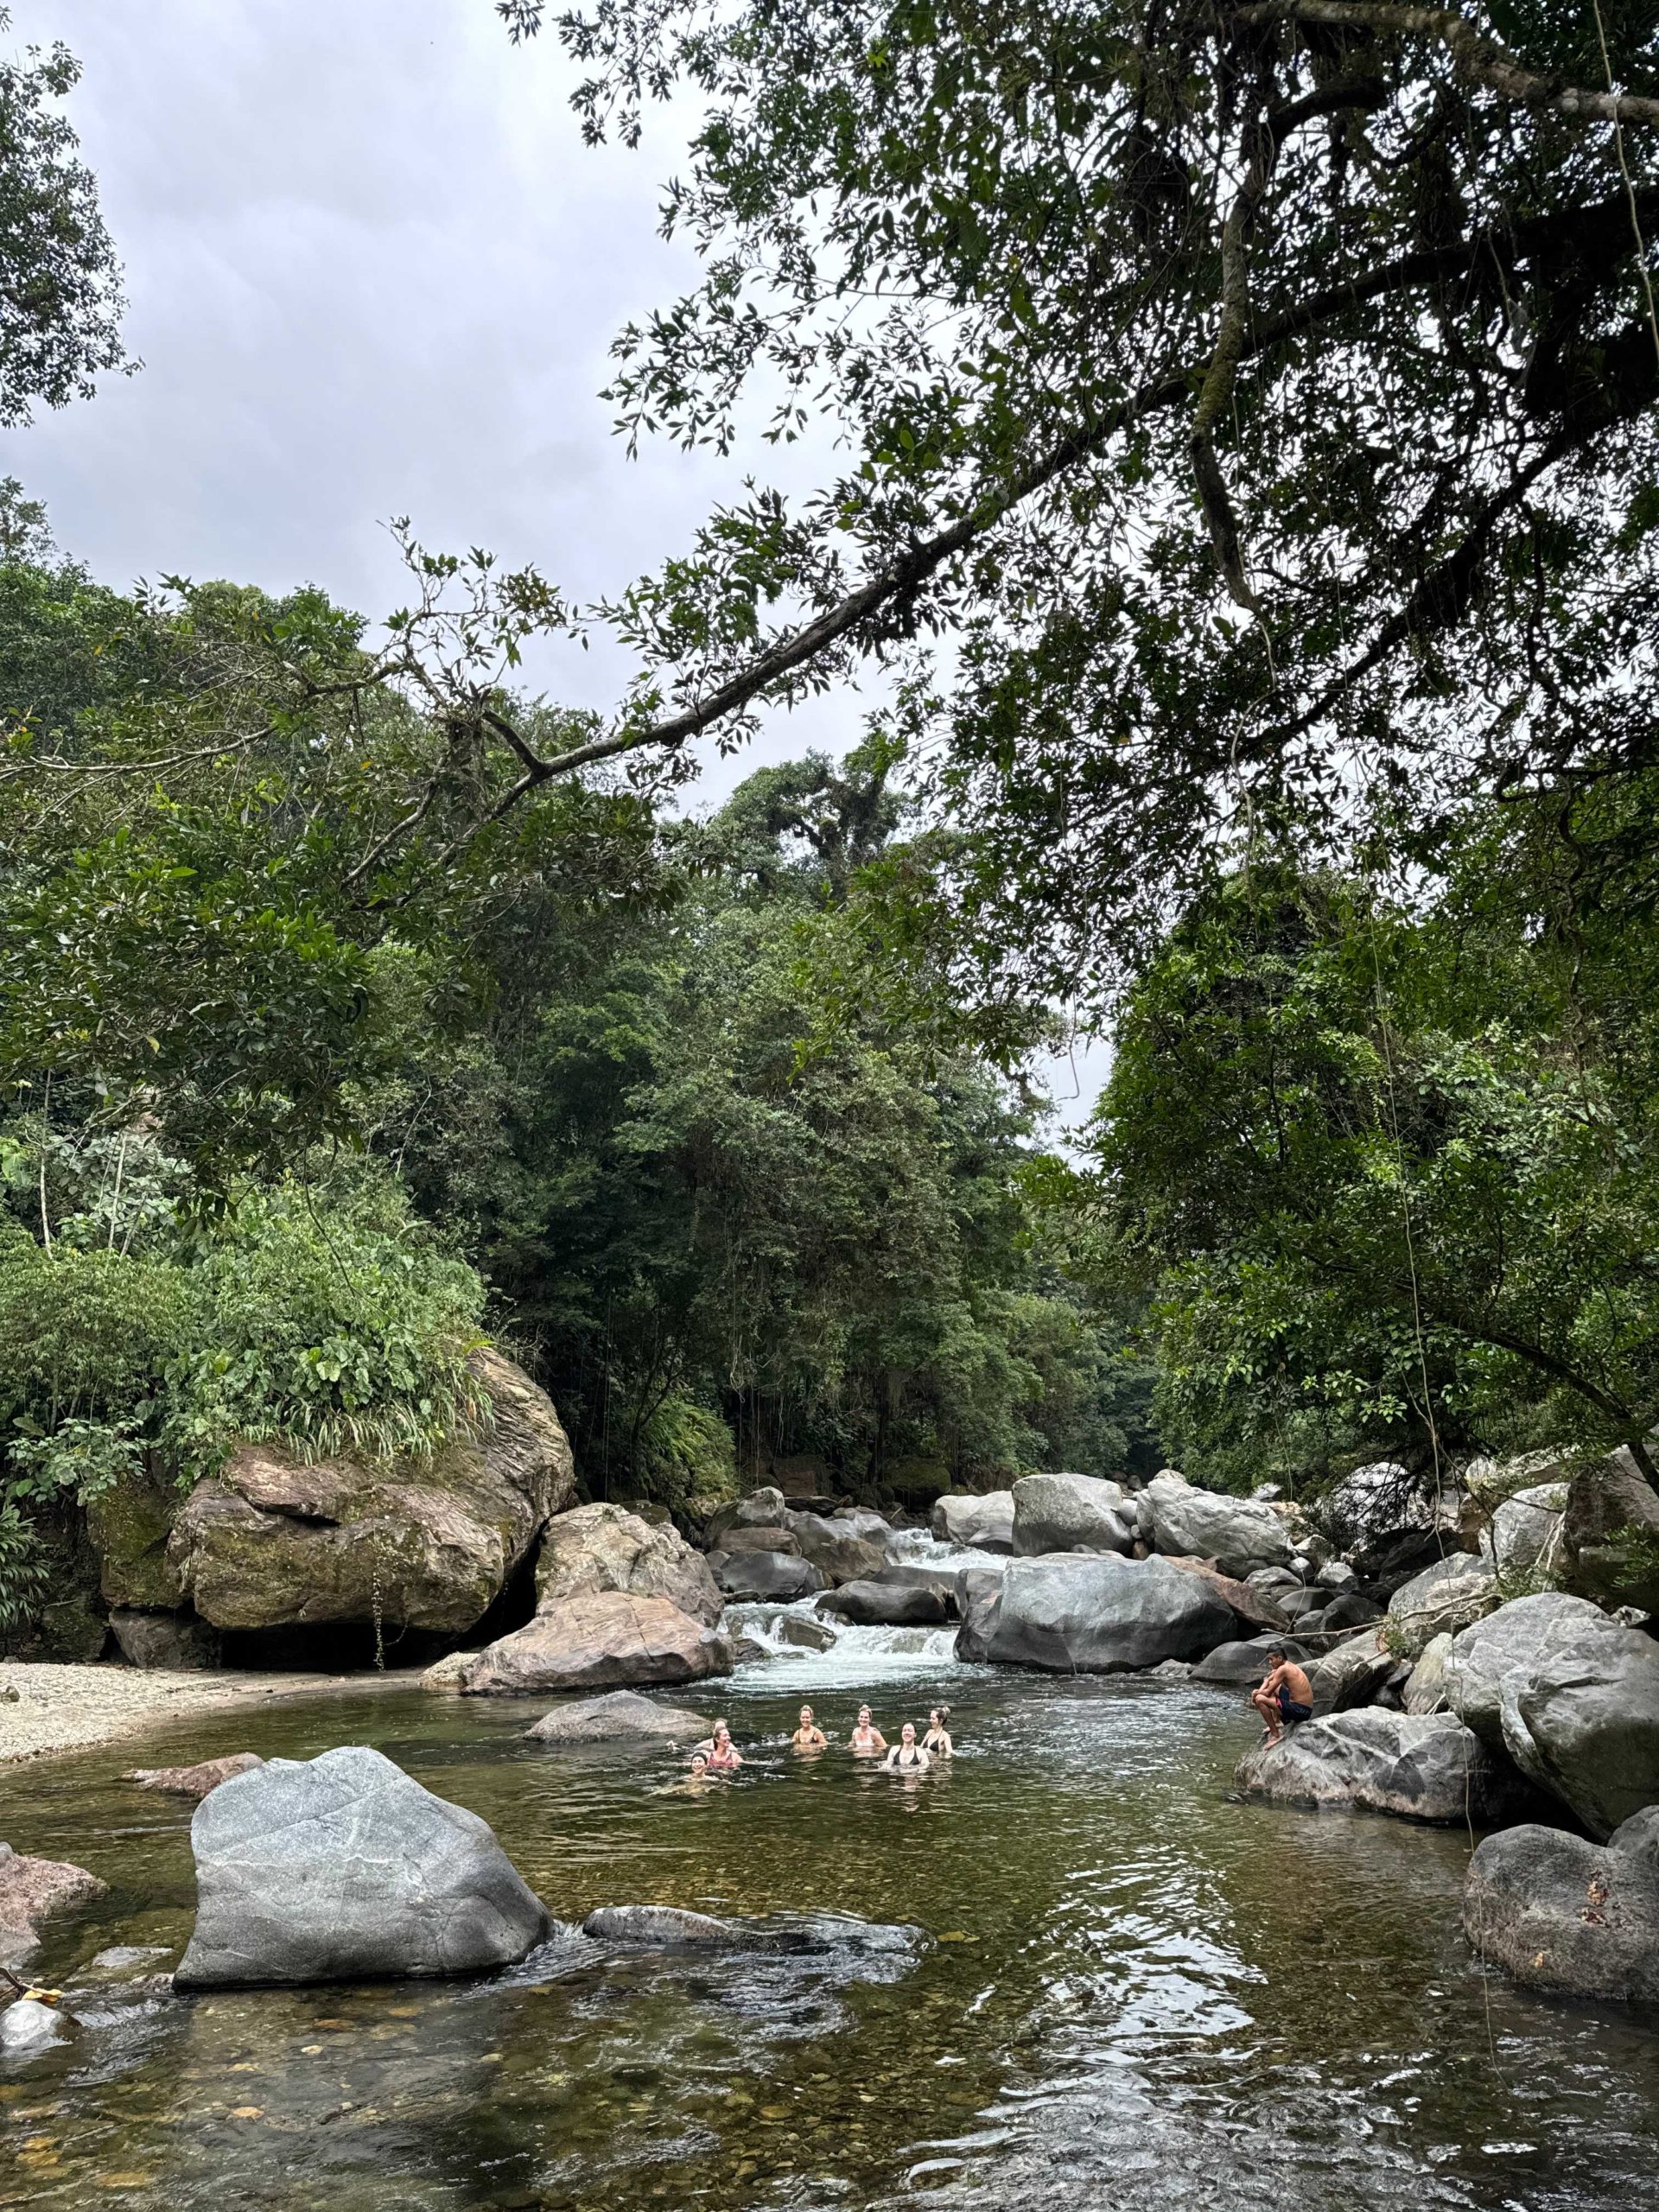 Guest swim in a river on the Lost City Trek in Colombia